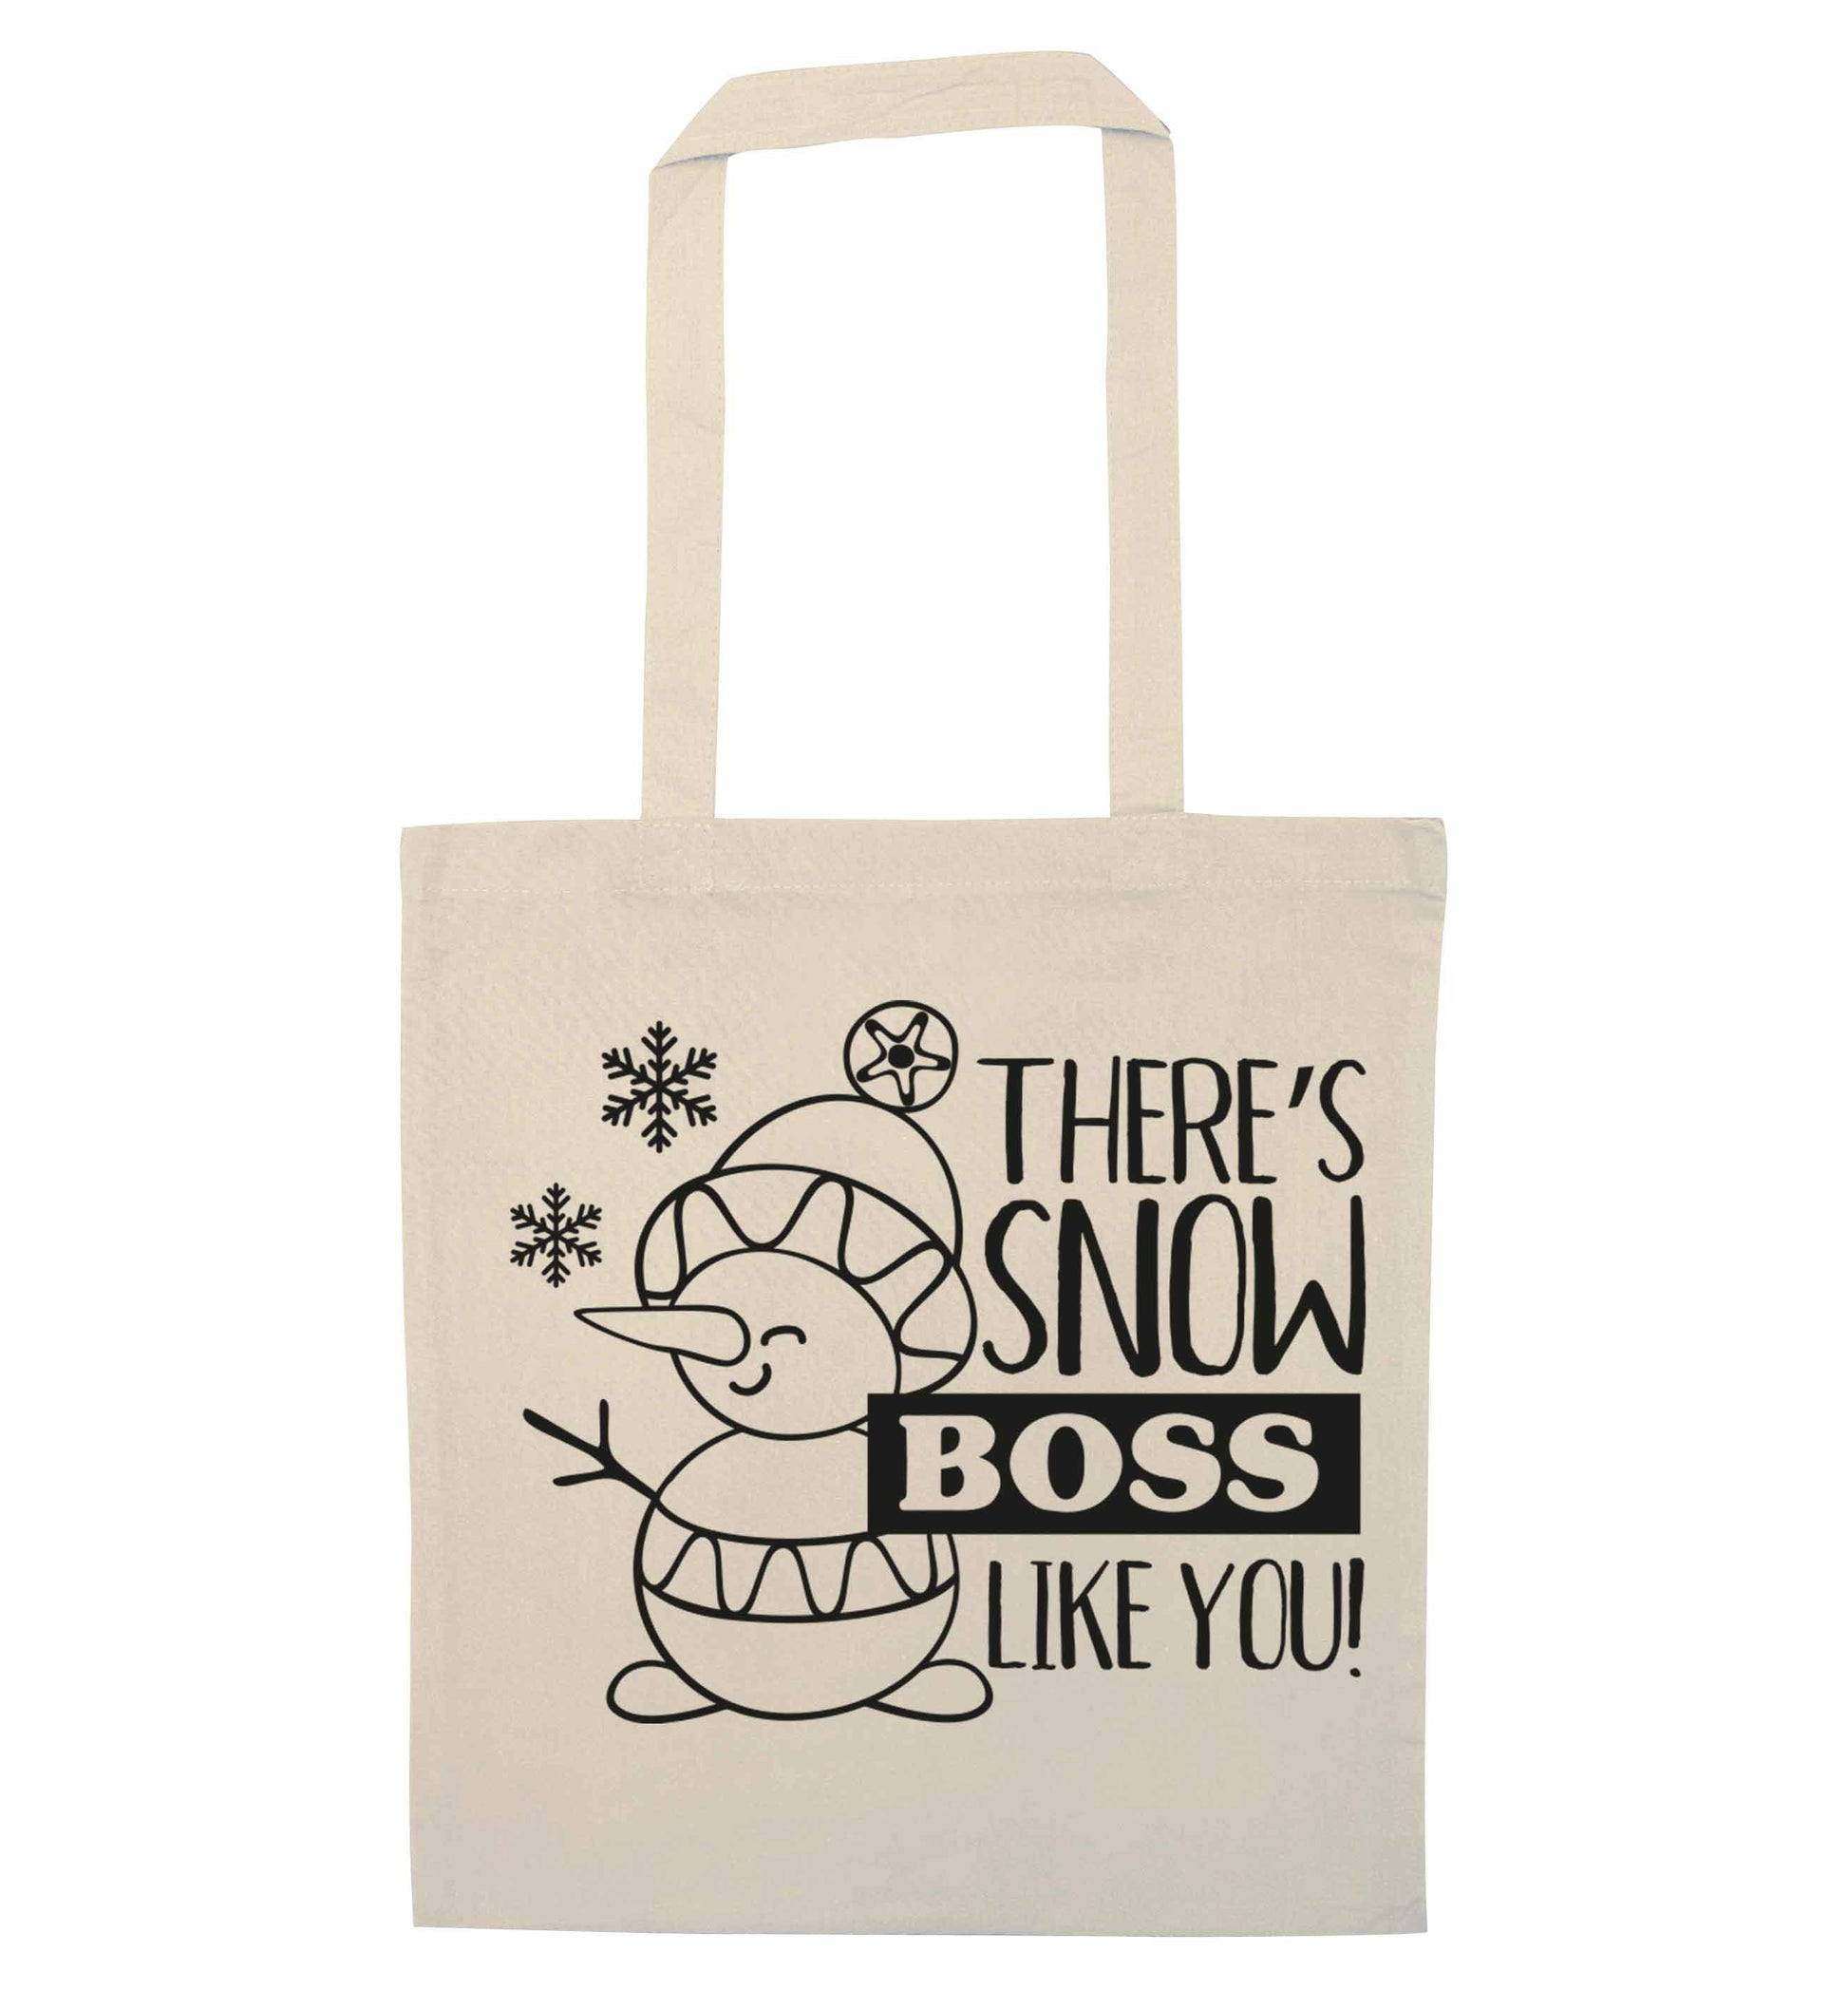 There's snow boss like you natural tote bag